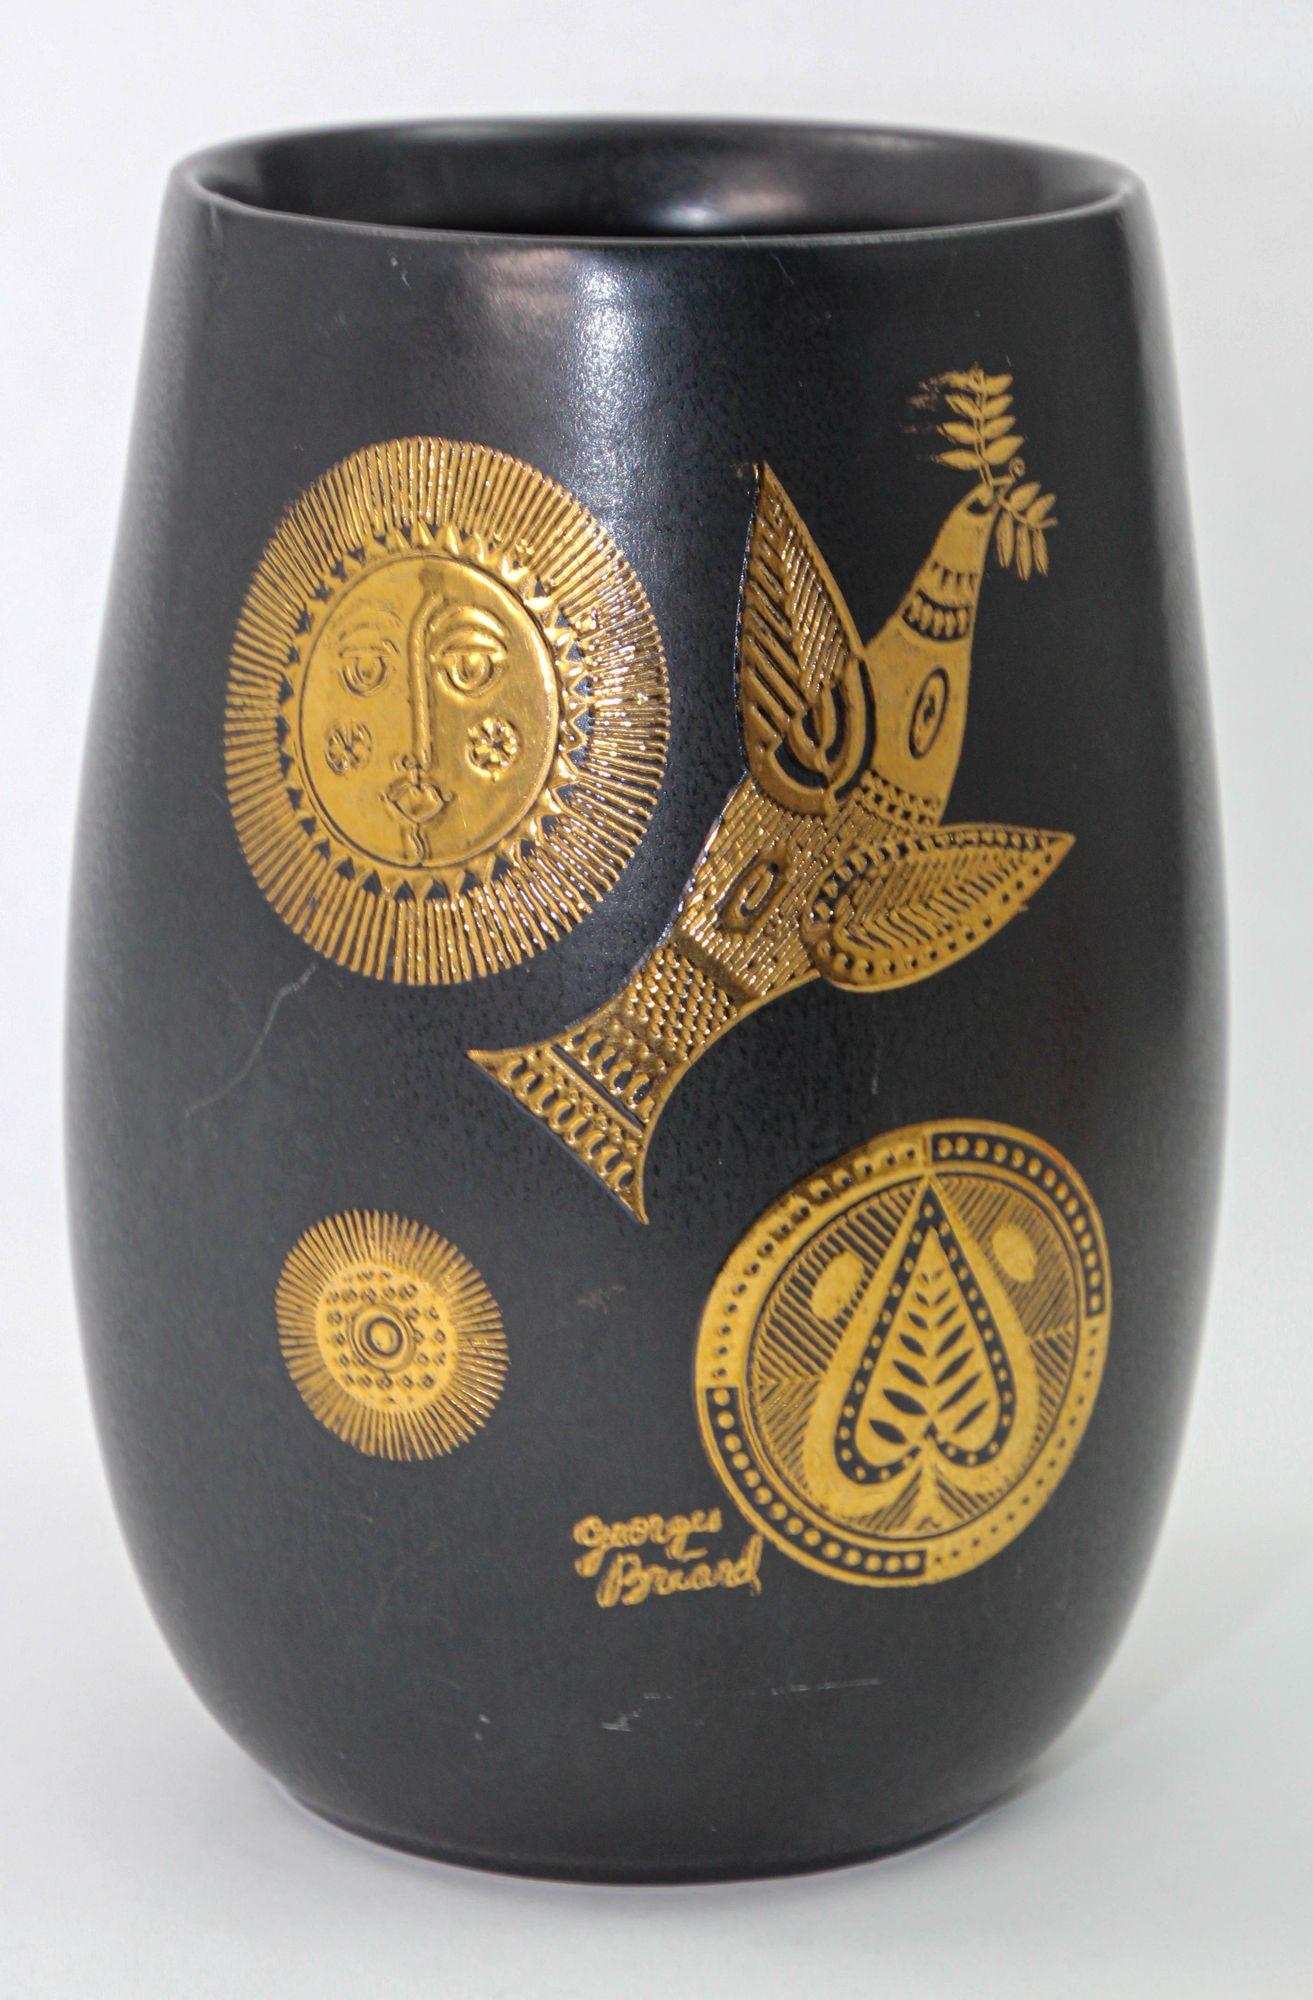 Gold inlaid black matte ceramic vase by Georges Briard for Hyalyn Pottery, USA, 1960s.
Signed GEORGES BRIARD on the front of the vase, the design is carved into the ceramic and painted in 22 karat gold.
The bird with the olive branch in his beak was